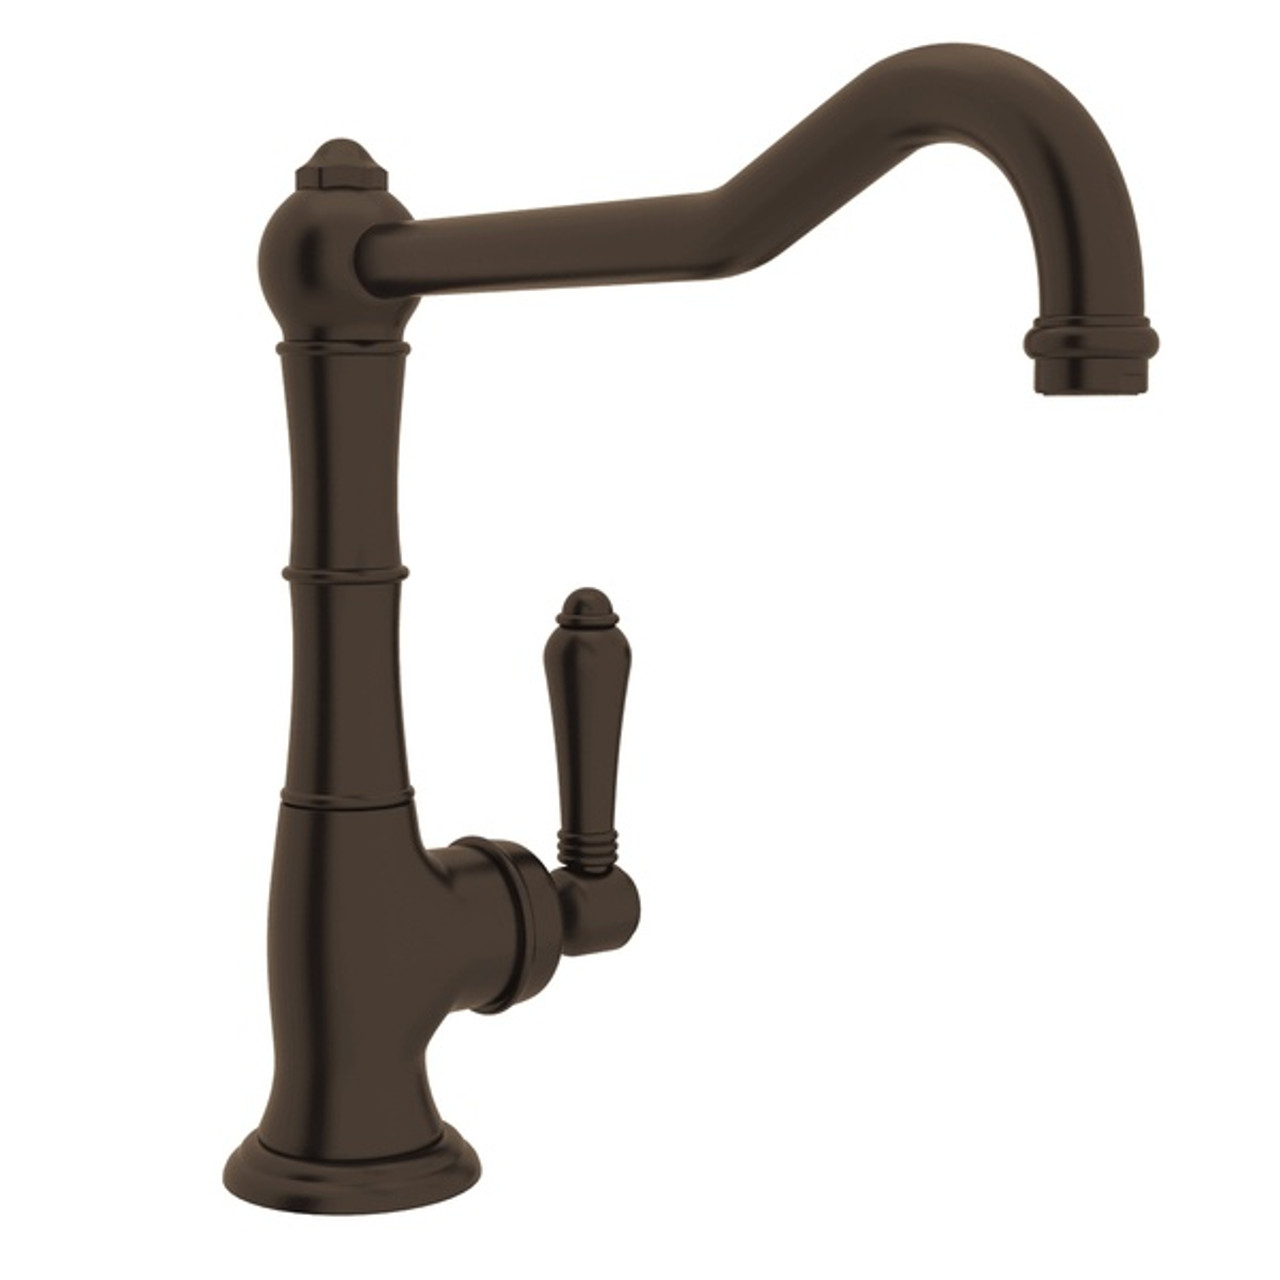 ROHL A3650 11LMTCB-2 Kitchen FAUCETS, Tuscan Brass - 1